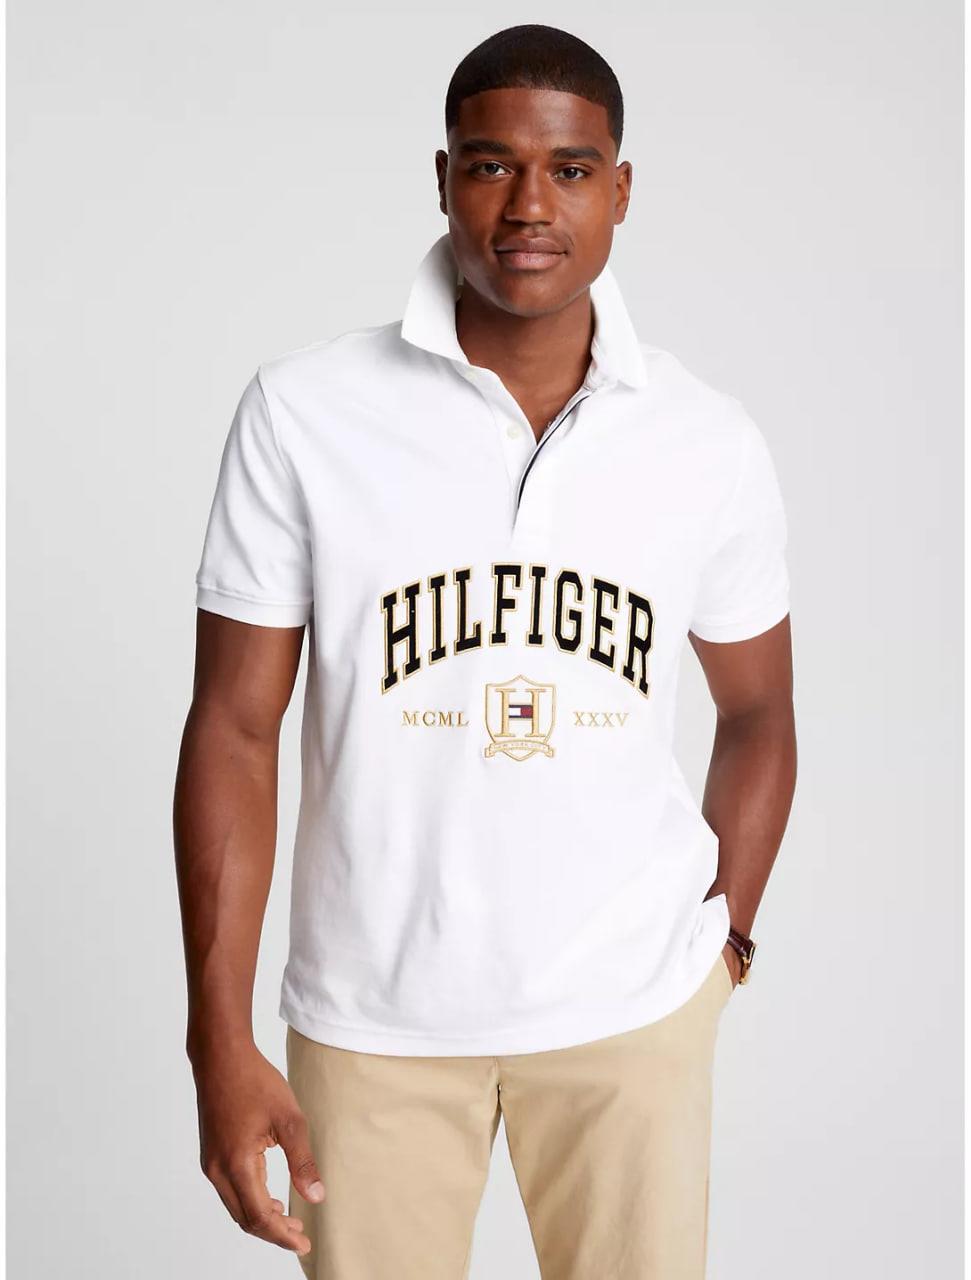 Tommy Hilfiger Mens S/S Polo AT-78J8885